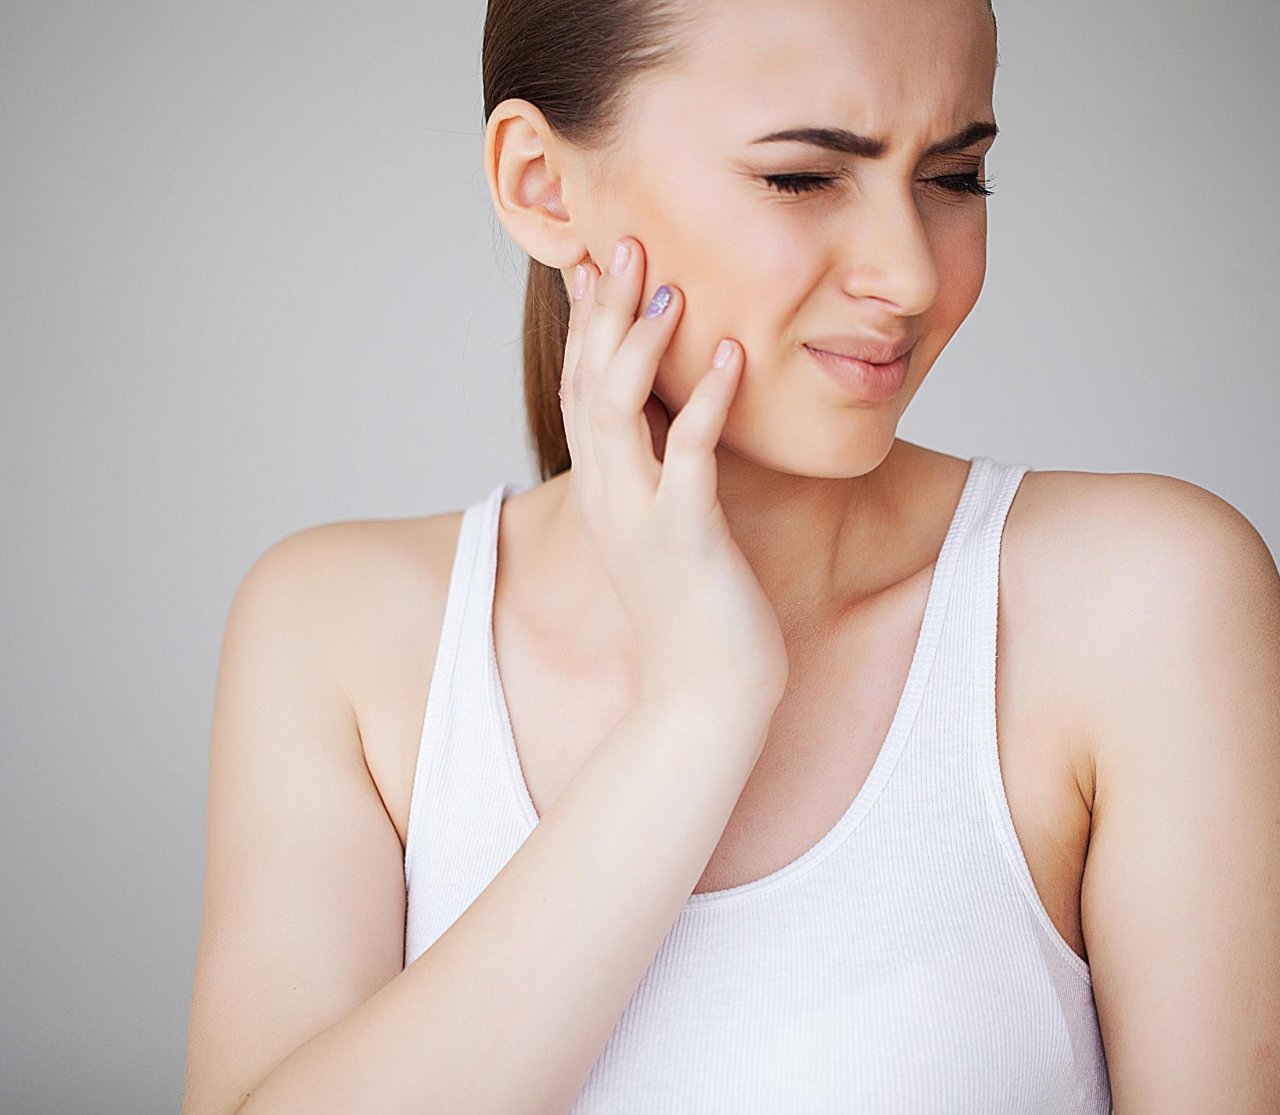 Woman experiencing jaw pain, holding jaw in pain and grimacing